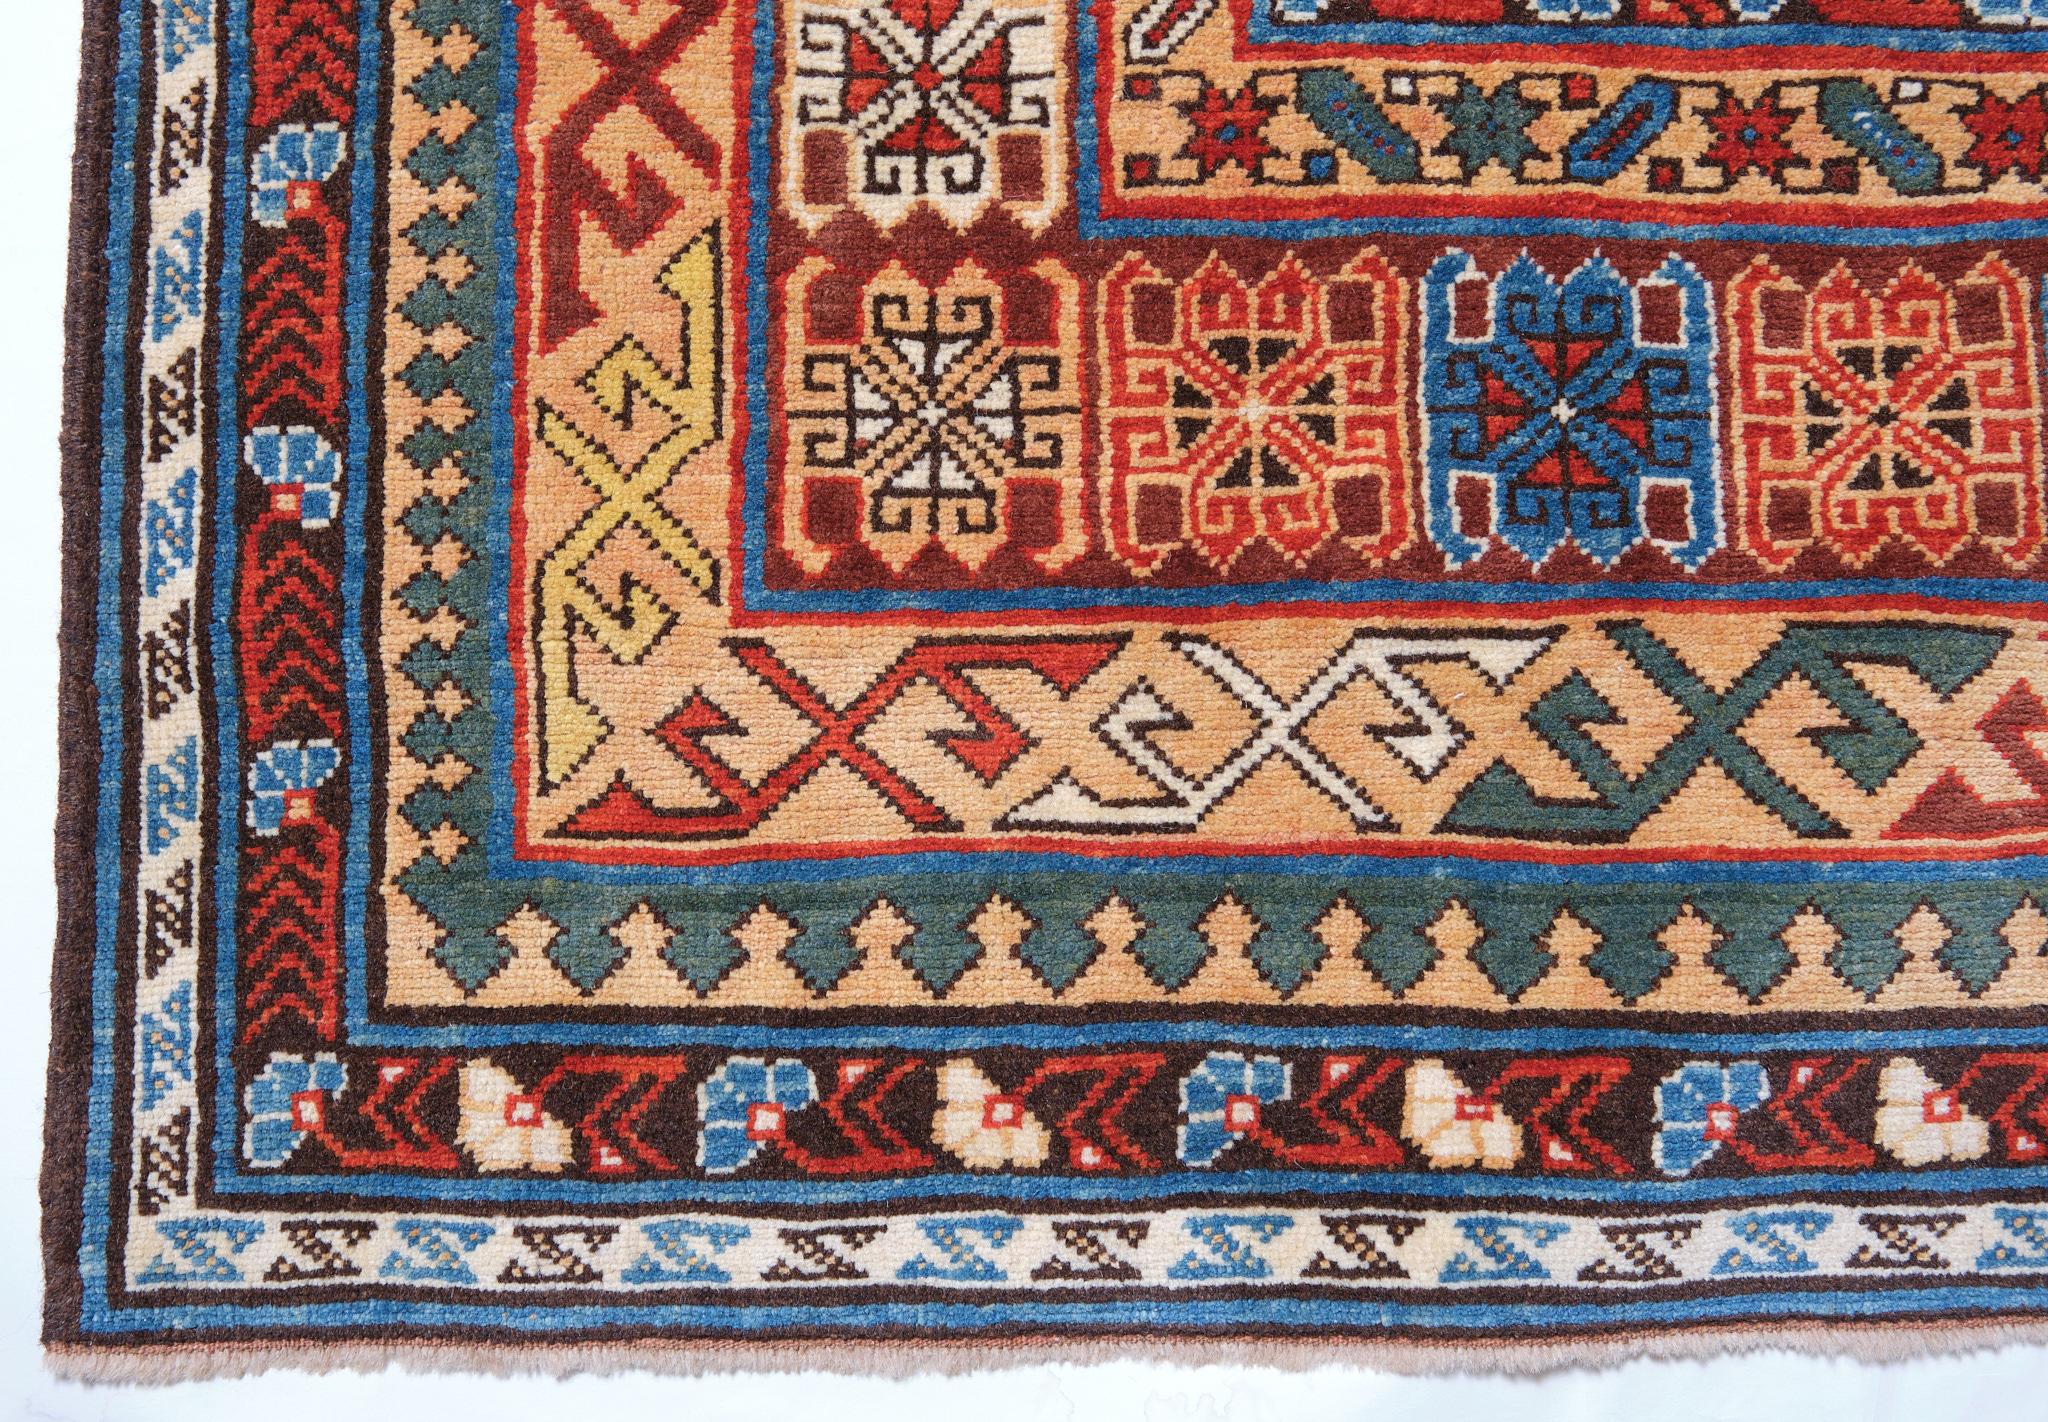 The source of the rug comes from the book Oriental Rugs Volume 1 Caucasian, Ian Bennett, Oriental Textile Press, Aberdeen 1993, nr.332. This is a spectacular example of the Konagkend type rug in the late 19th century in the Kuba region, Caucasus.